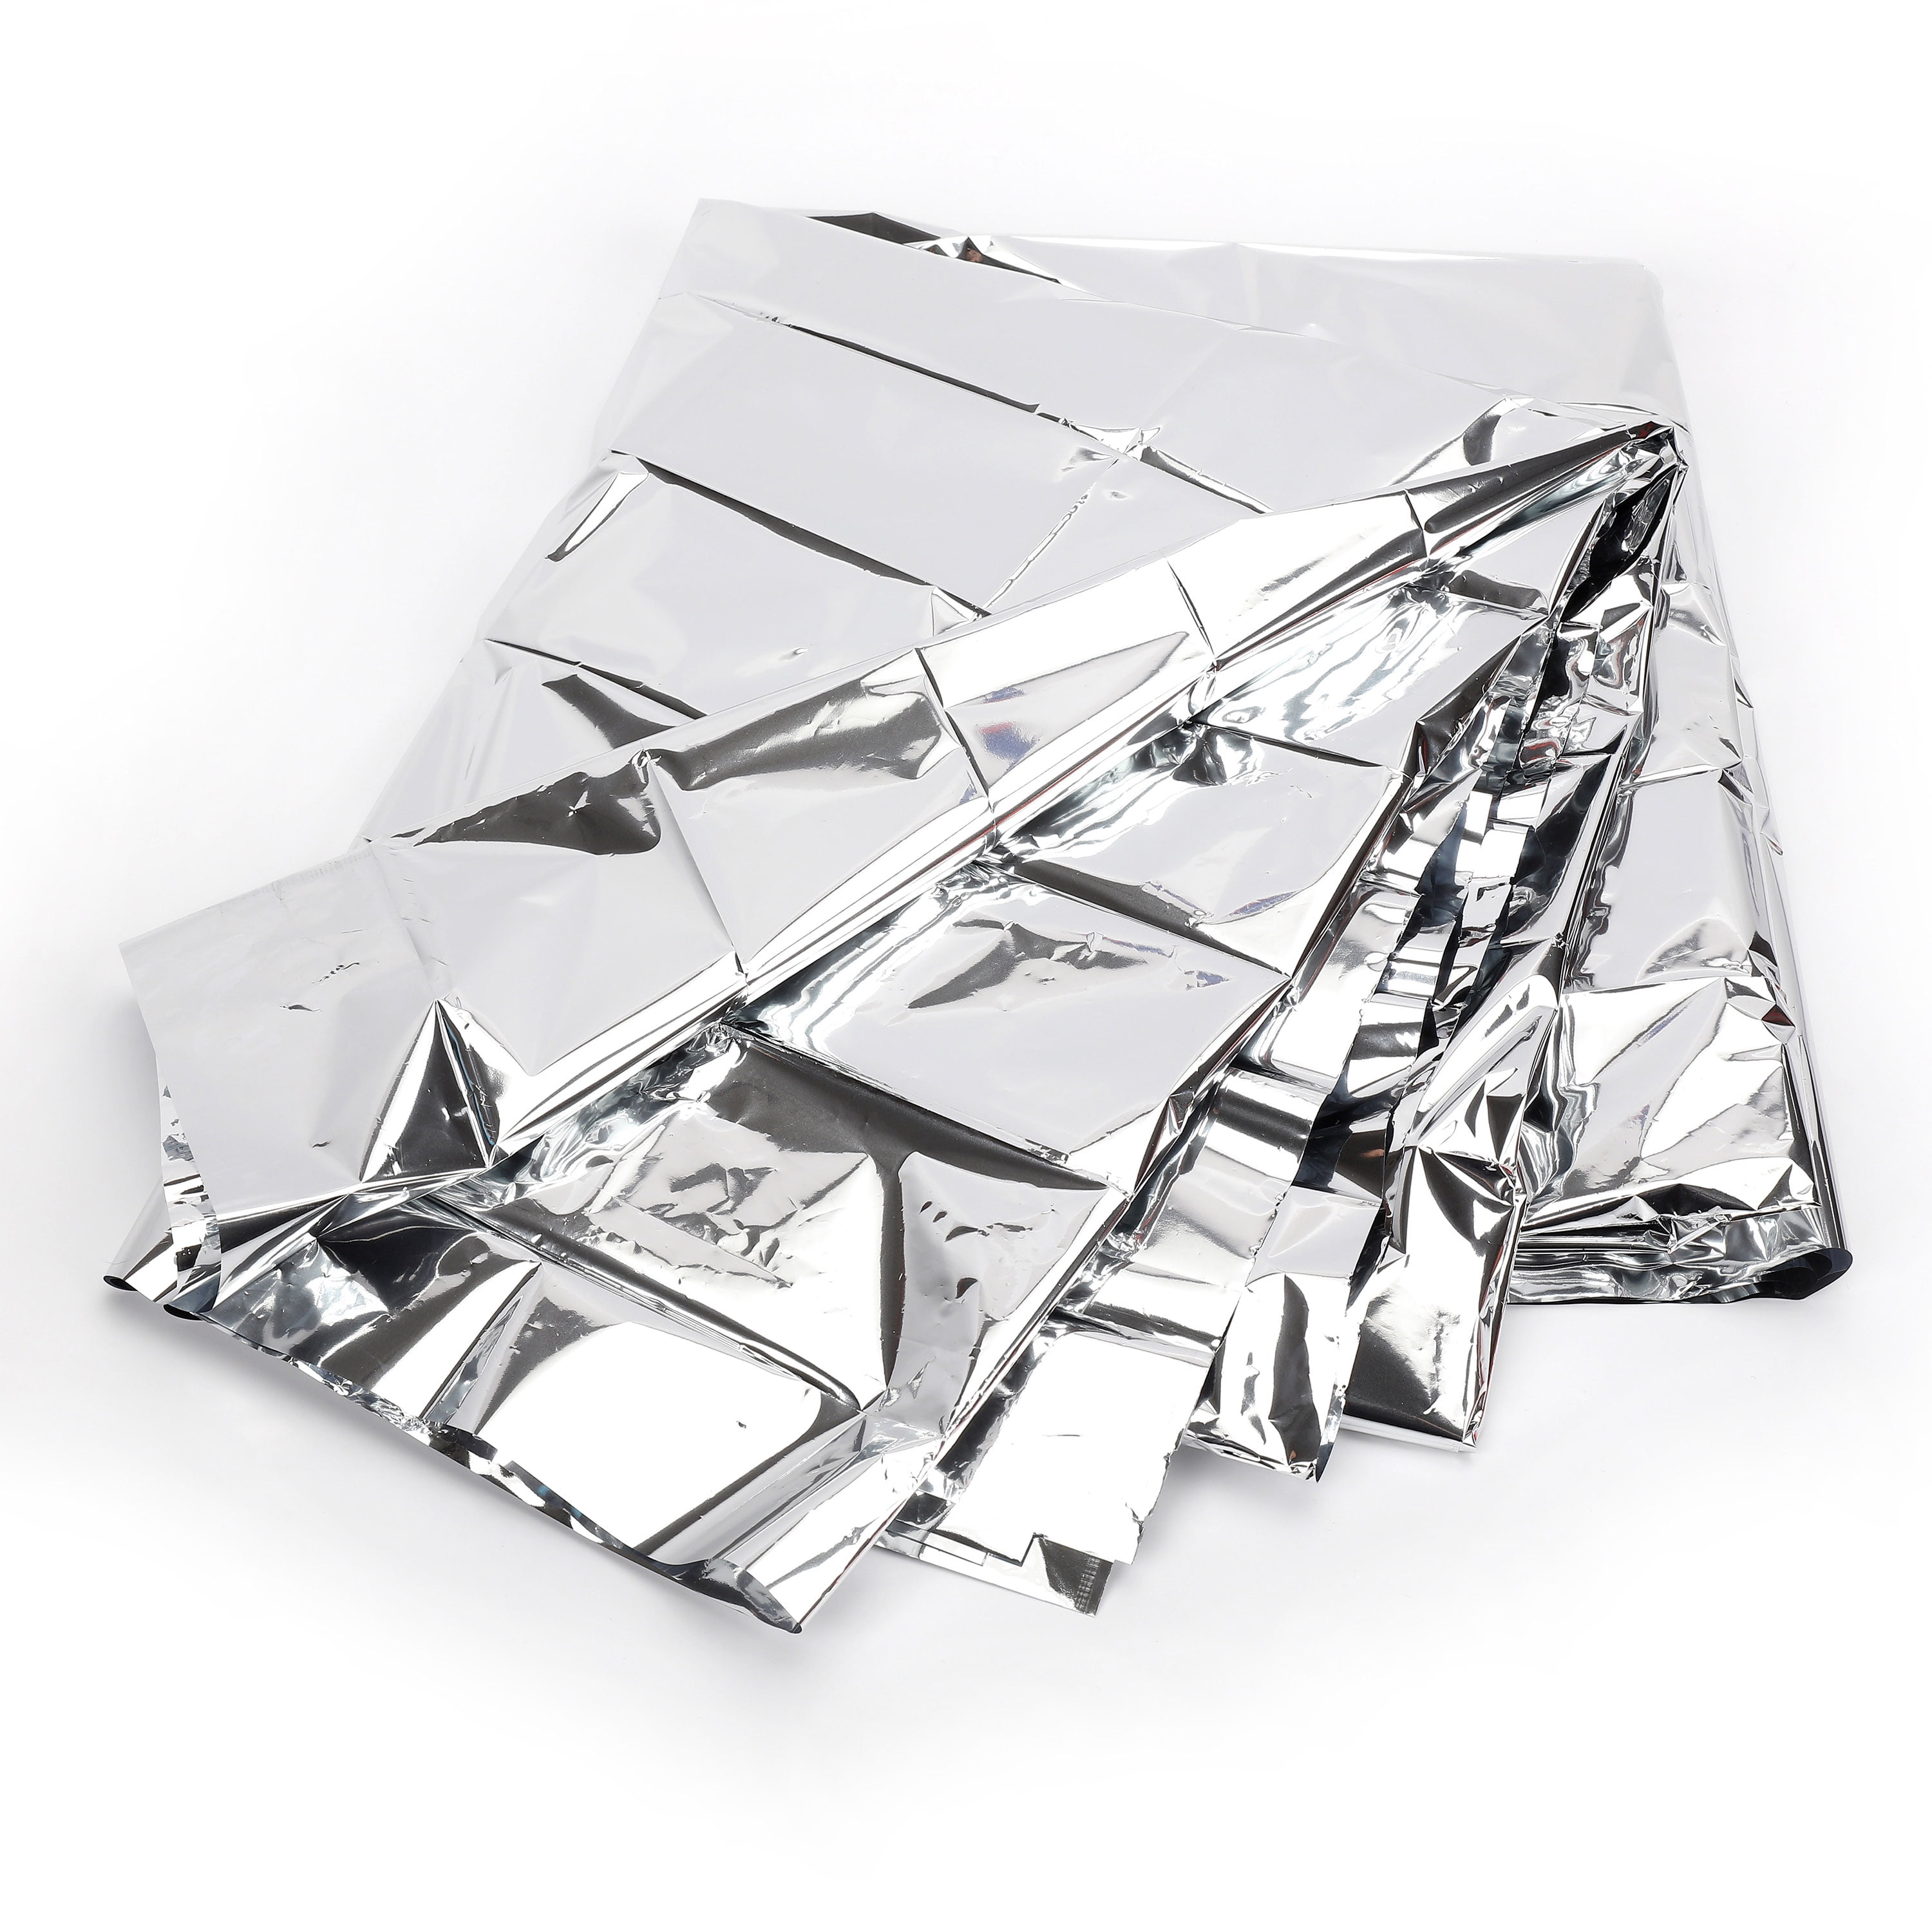 Details about   Gold Emergency Solar Survival Blanket Safety Insulating Mylar Thermal Heat Jd 